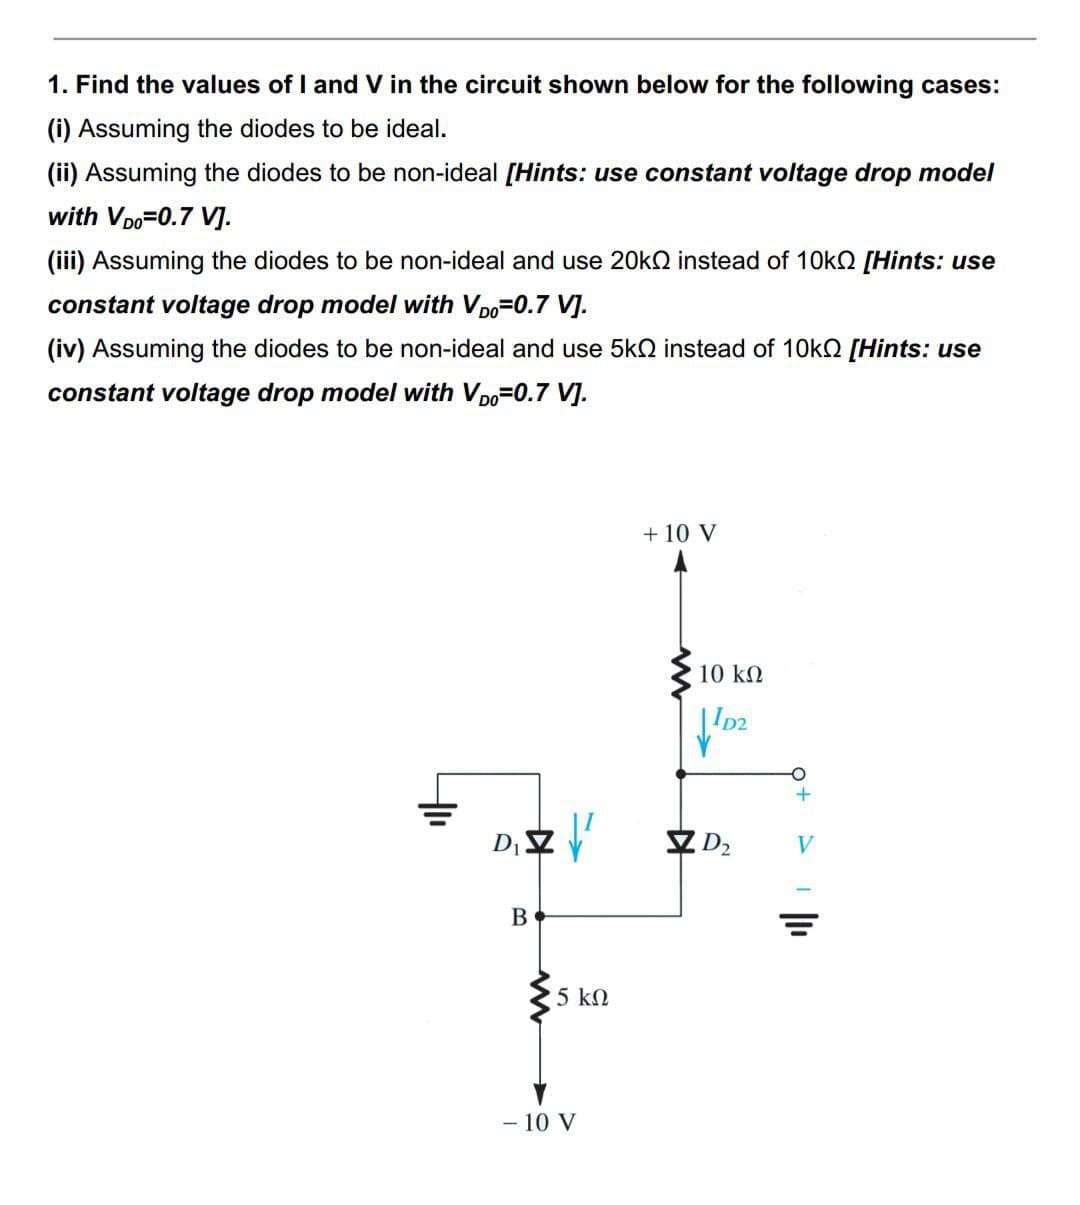 1. Find the values of I and V in the circuit shown below for the following cases:
(i) Assuming the diodes to be ideal.
(ii) Assuming the diodes to be non-ideal [Hints: use constant voltage drop model
with VDO=0.7 V].
(iii) Assuming the diodes to be non-ideal and use 20k instead of 10k [Hints: use
constant voltage drop model with VD=0.7 V].
(iv) Assuming the diodes to be non-ideal and use 5k instead of 10k0 [Hints: use
constant voltage drop model with VDO=0.7 V].
tu
D₁ Z ²
B
5 ΚΩ
- 10 V
+ 10 V
10 ΚΩ
ID2
D₂
O
+
||